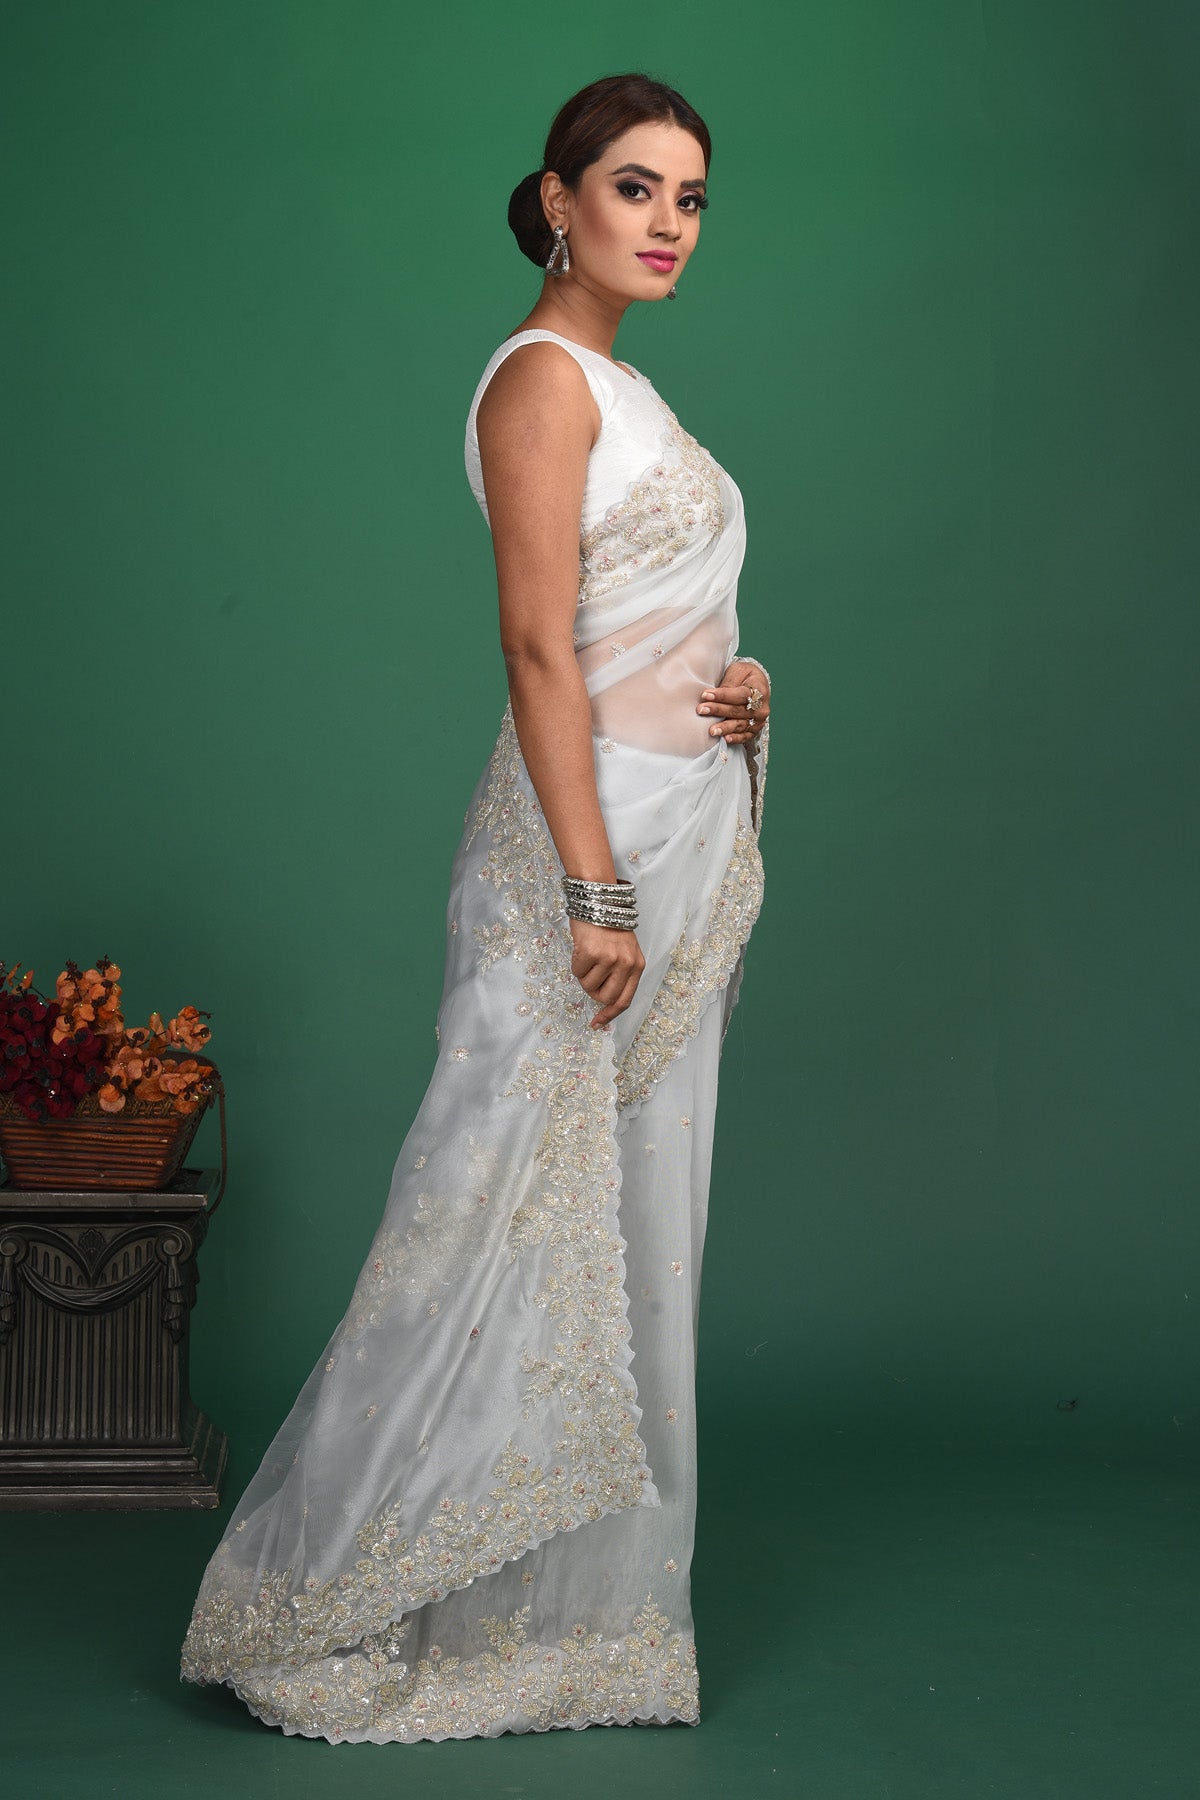 Buy beautiful white organza sari online in USA with embroidered border. Be a vision of style and elegance at parties and special occasions in beautiful designer sarees, embroidered sarees, printed sarees, satin saris from Pure Elegance Indian fashion store in USA.-side\